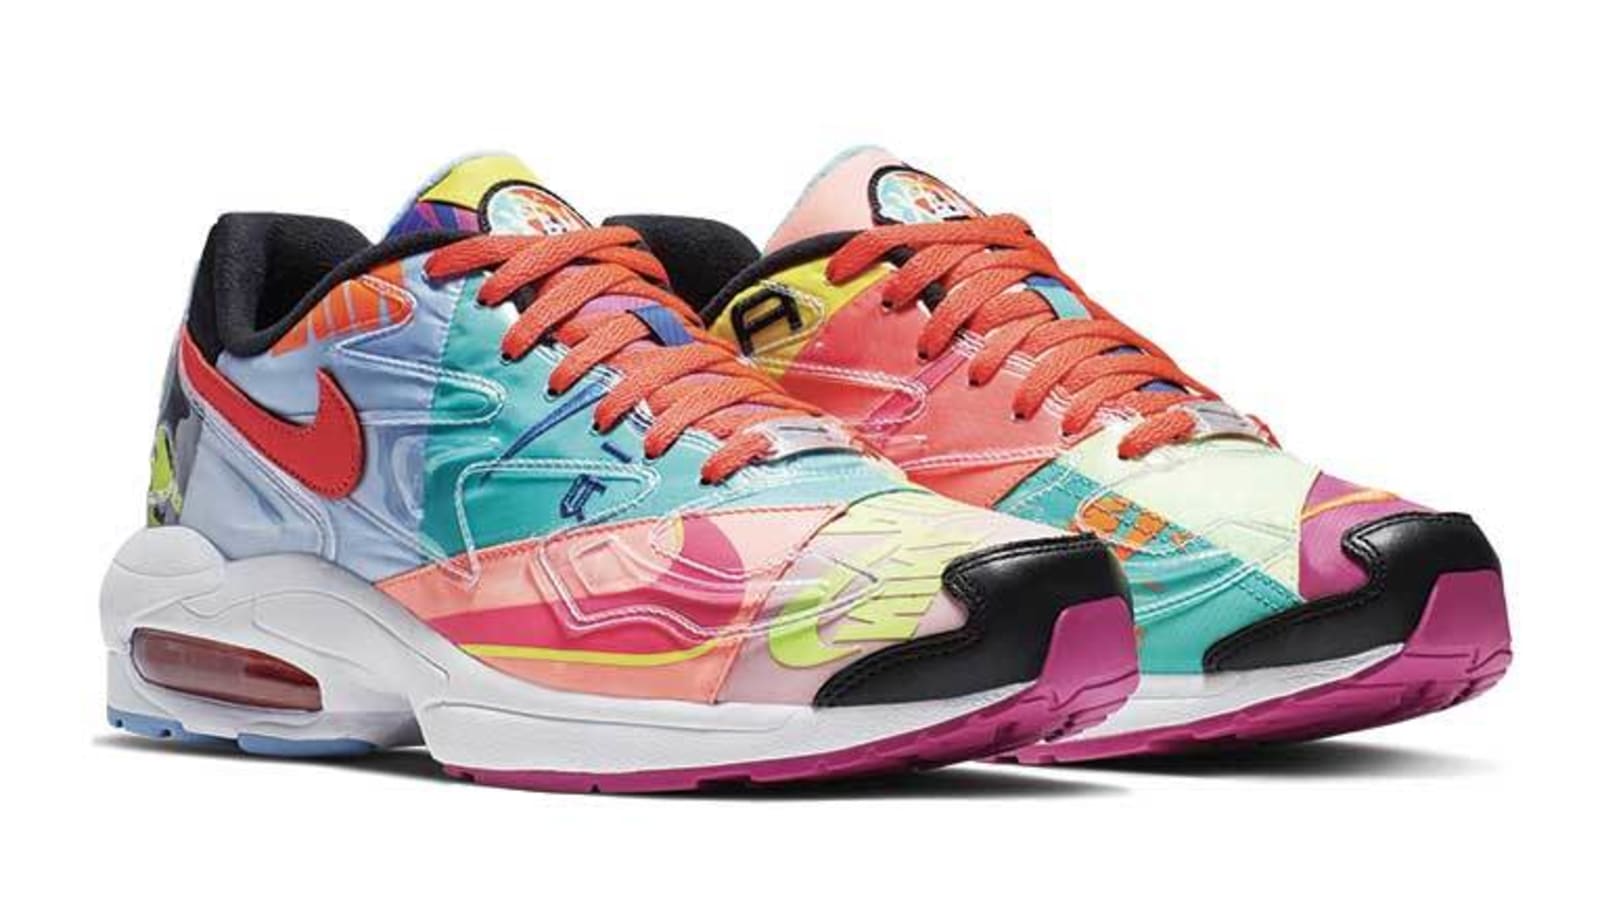 Atmos X Nike Air Max2 Light Images Revealed